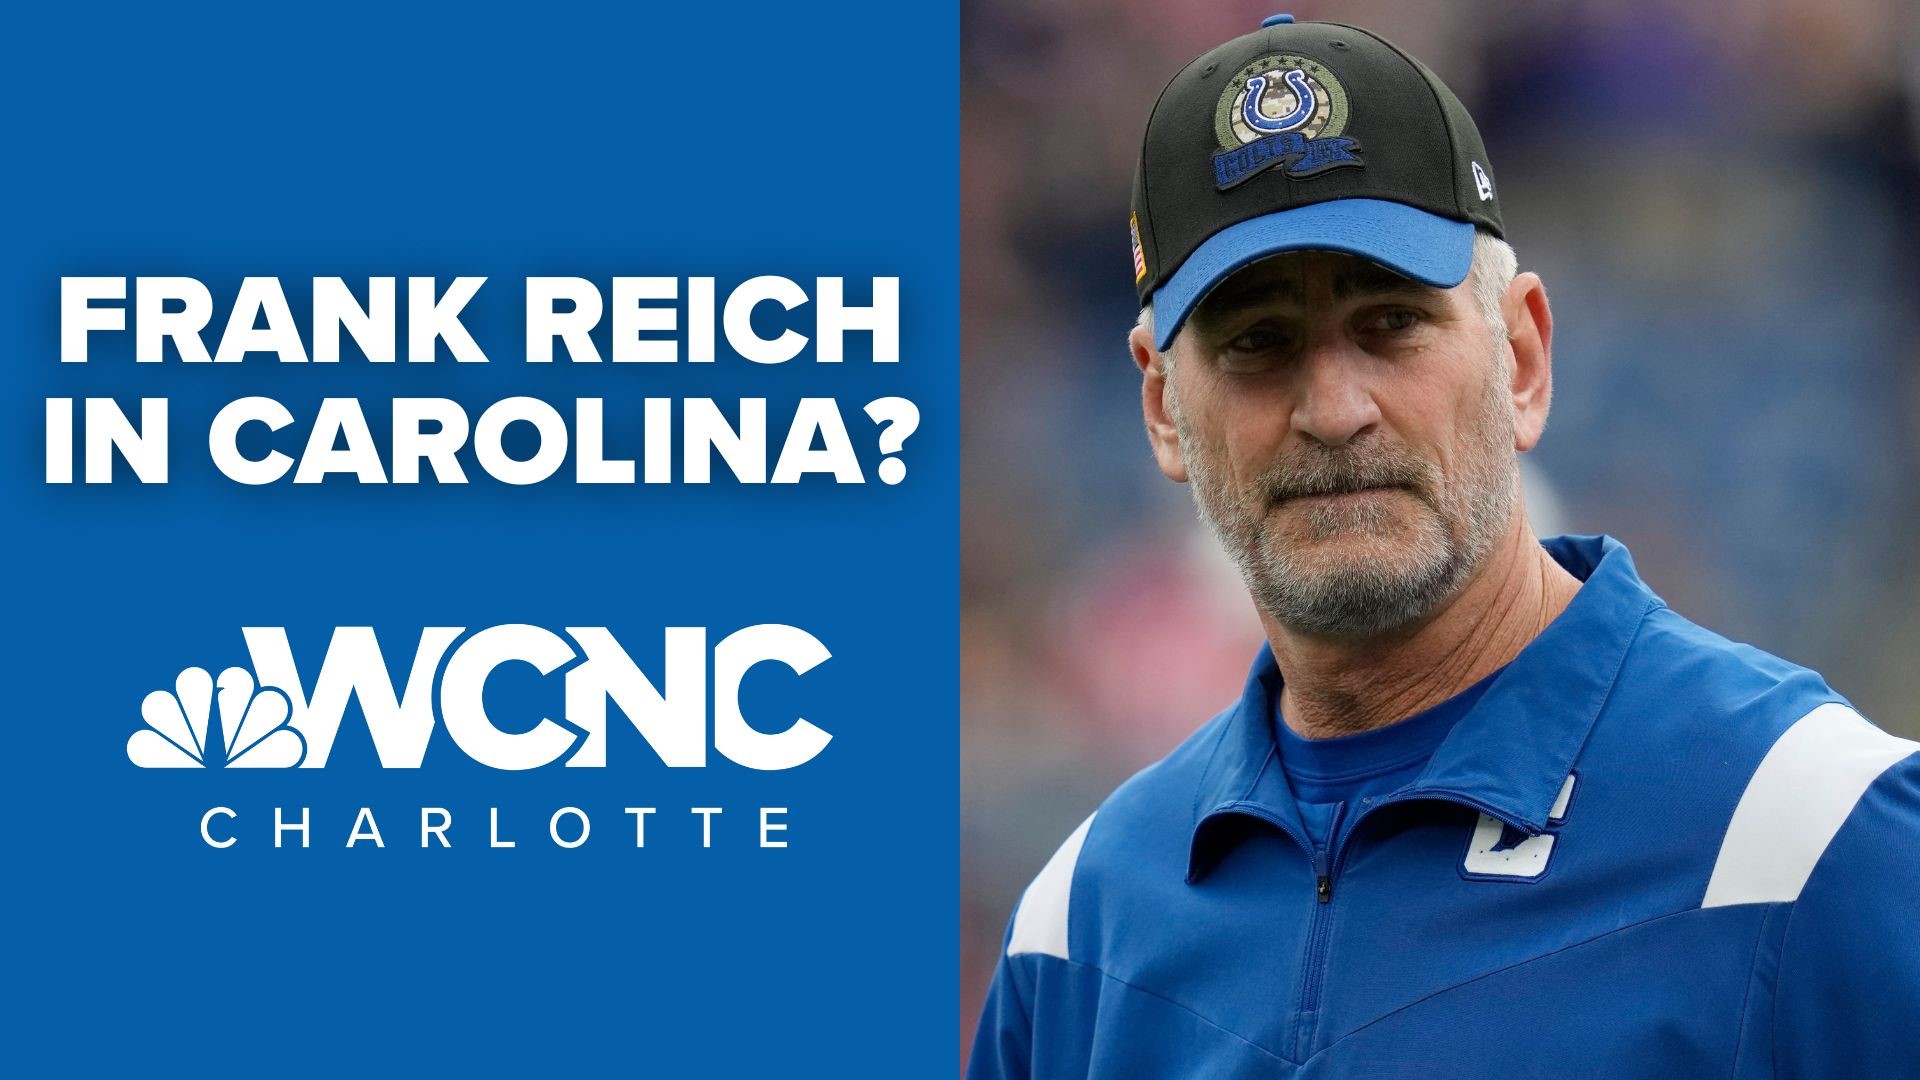 WCNC Charlotte's Nick Carboni and Joel Erickson of the Indianapolis Star discuss Frank Reich's interview with the Panthers and if he'd be a good fit as head coach.